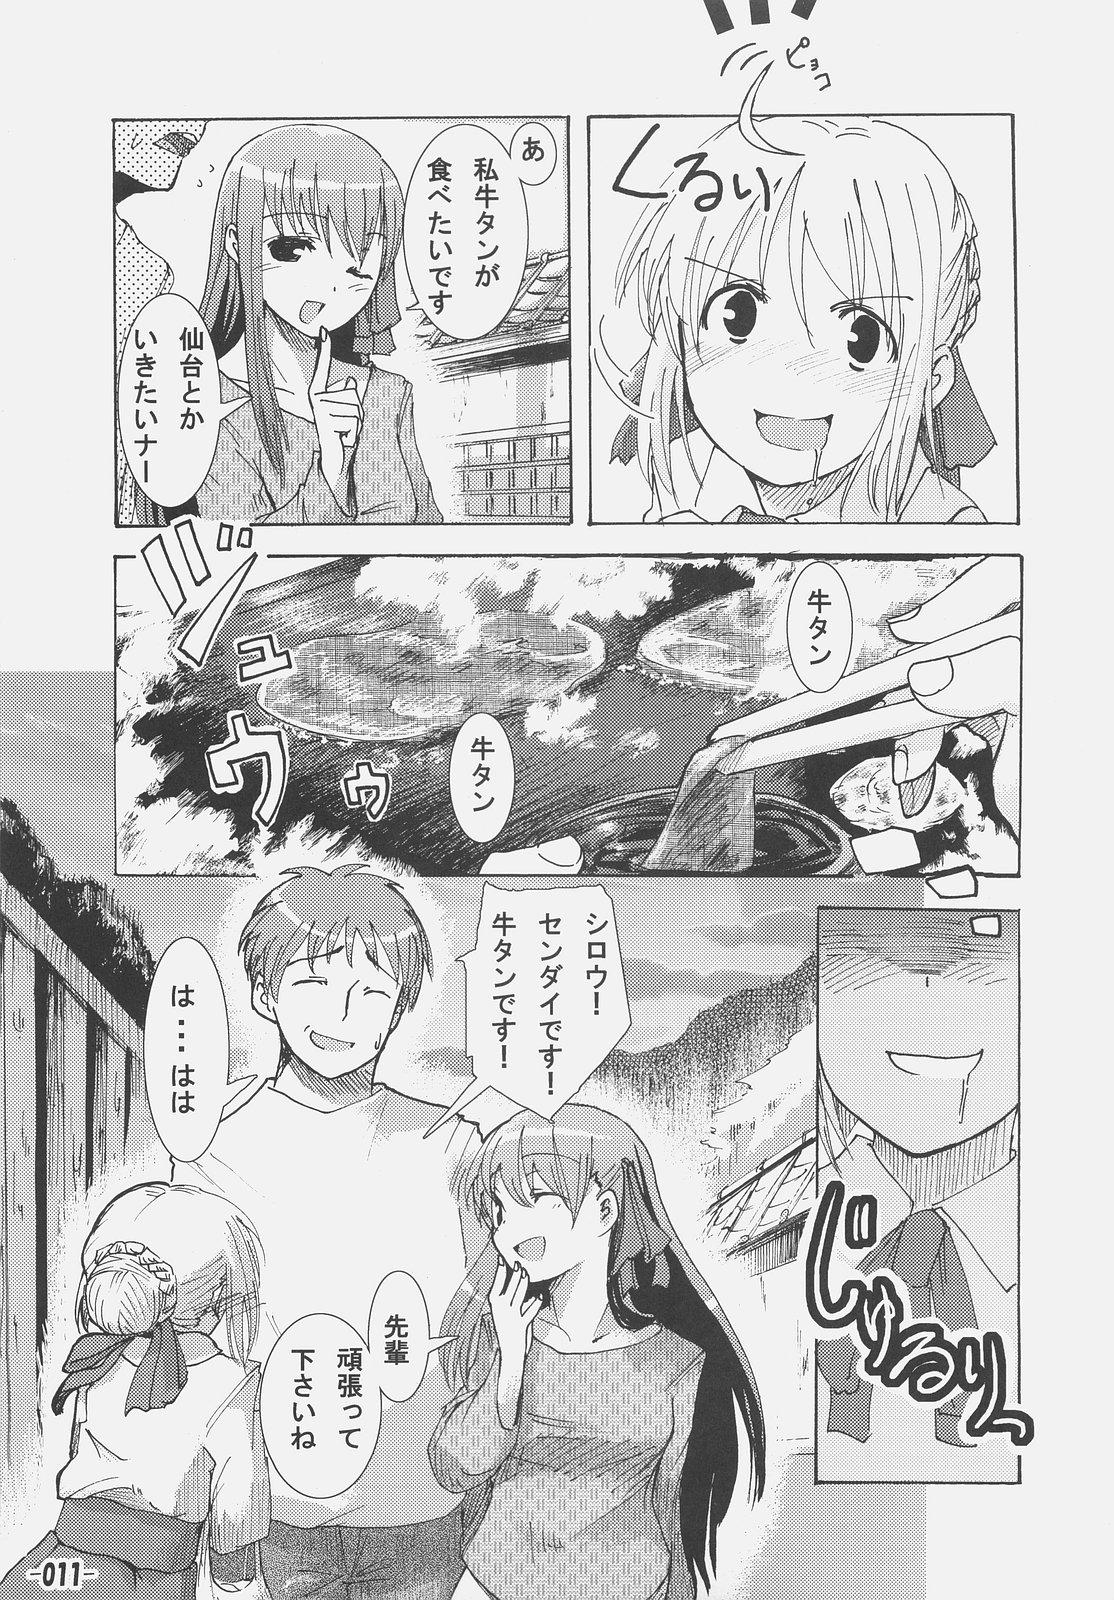 Petite Frenzy driving - Fate hollow ataraxia Price - Page 10